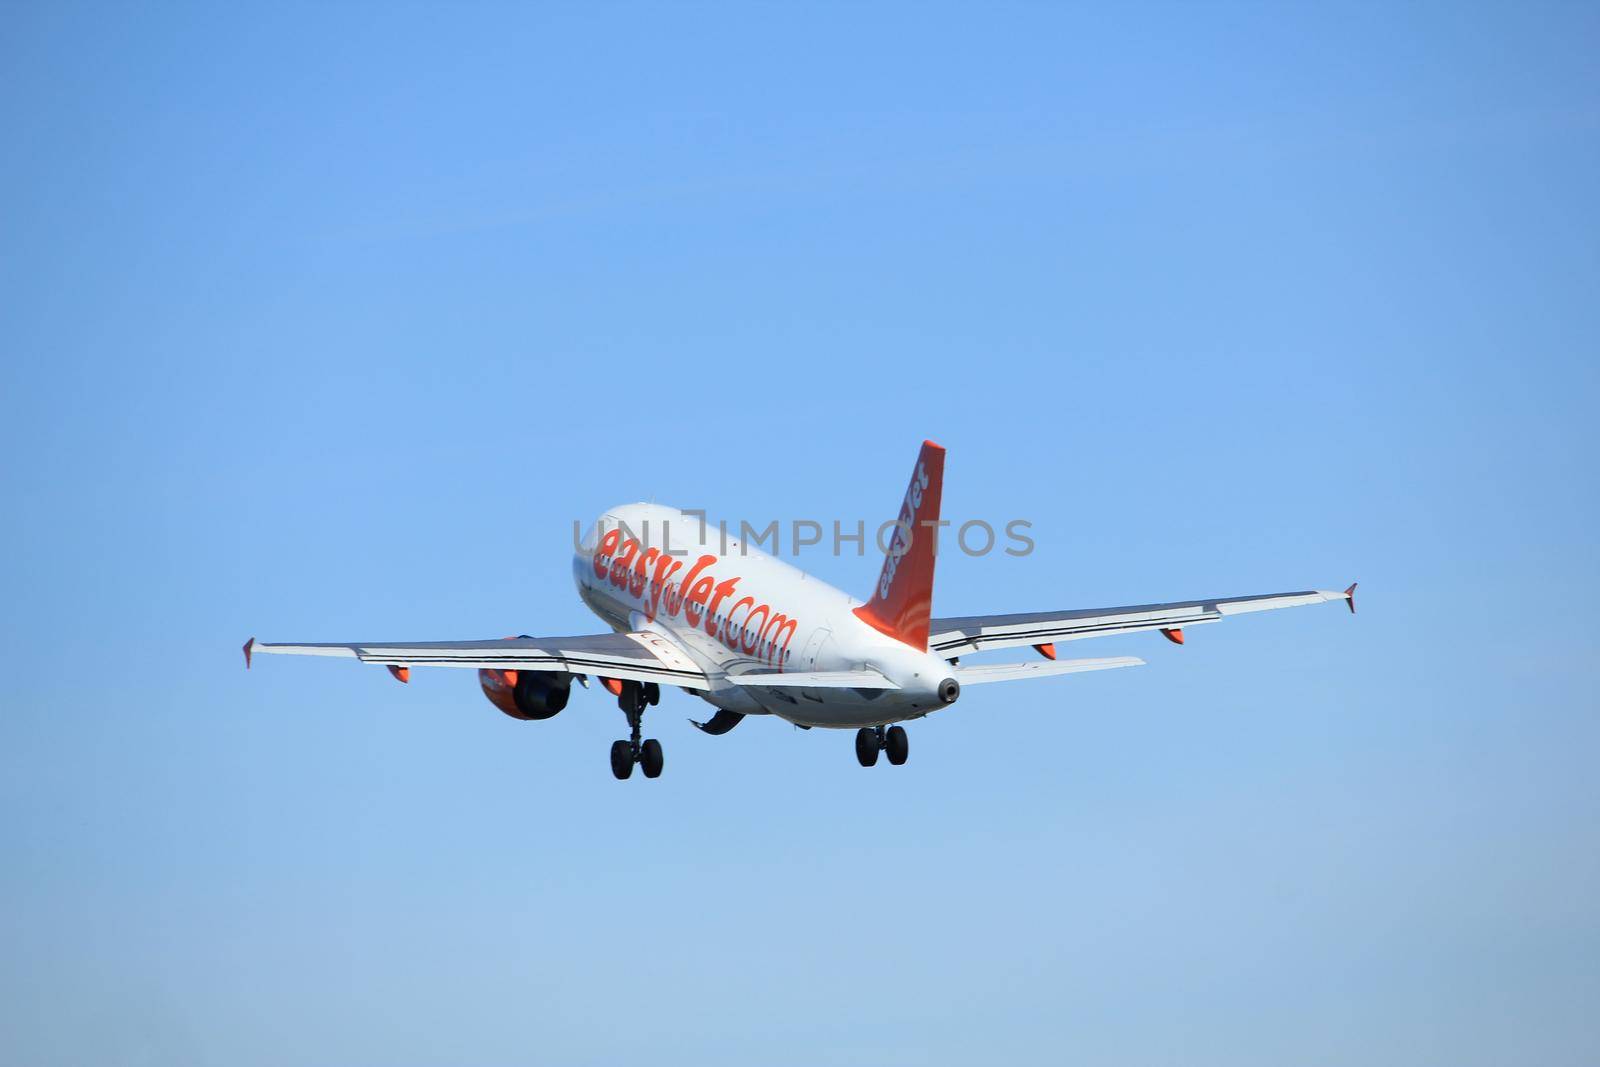 Amsterdam the Netherlands - March 25th, 2017: G-EZEN easyJet Airbus A319-100 takeoff from Polderbaan runway.